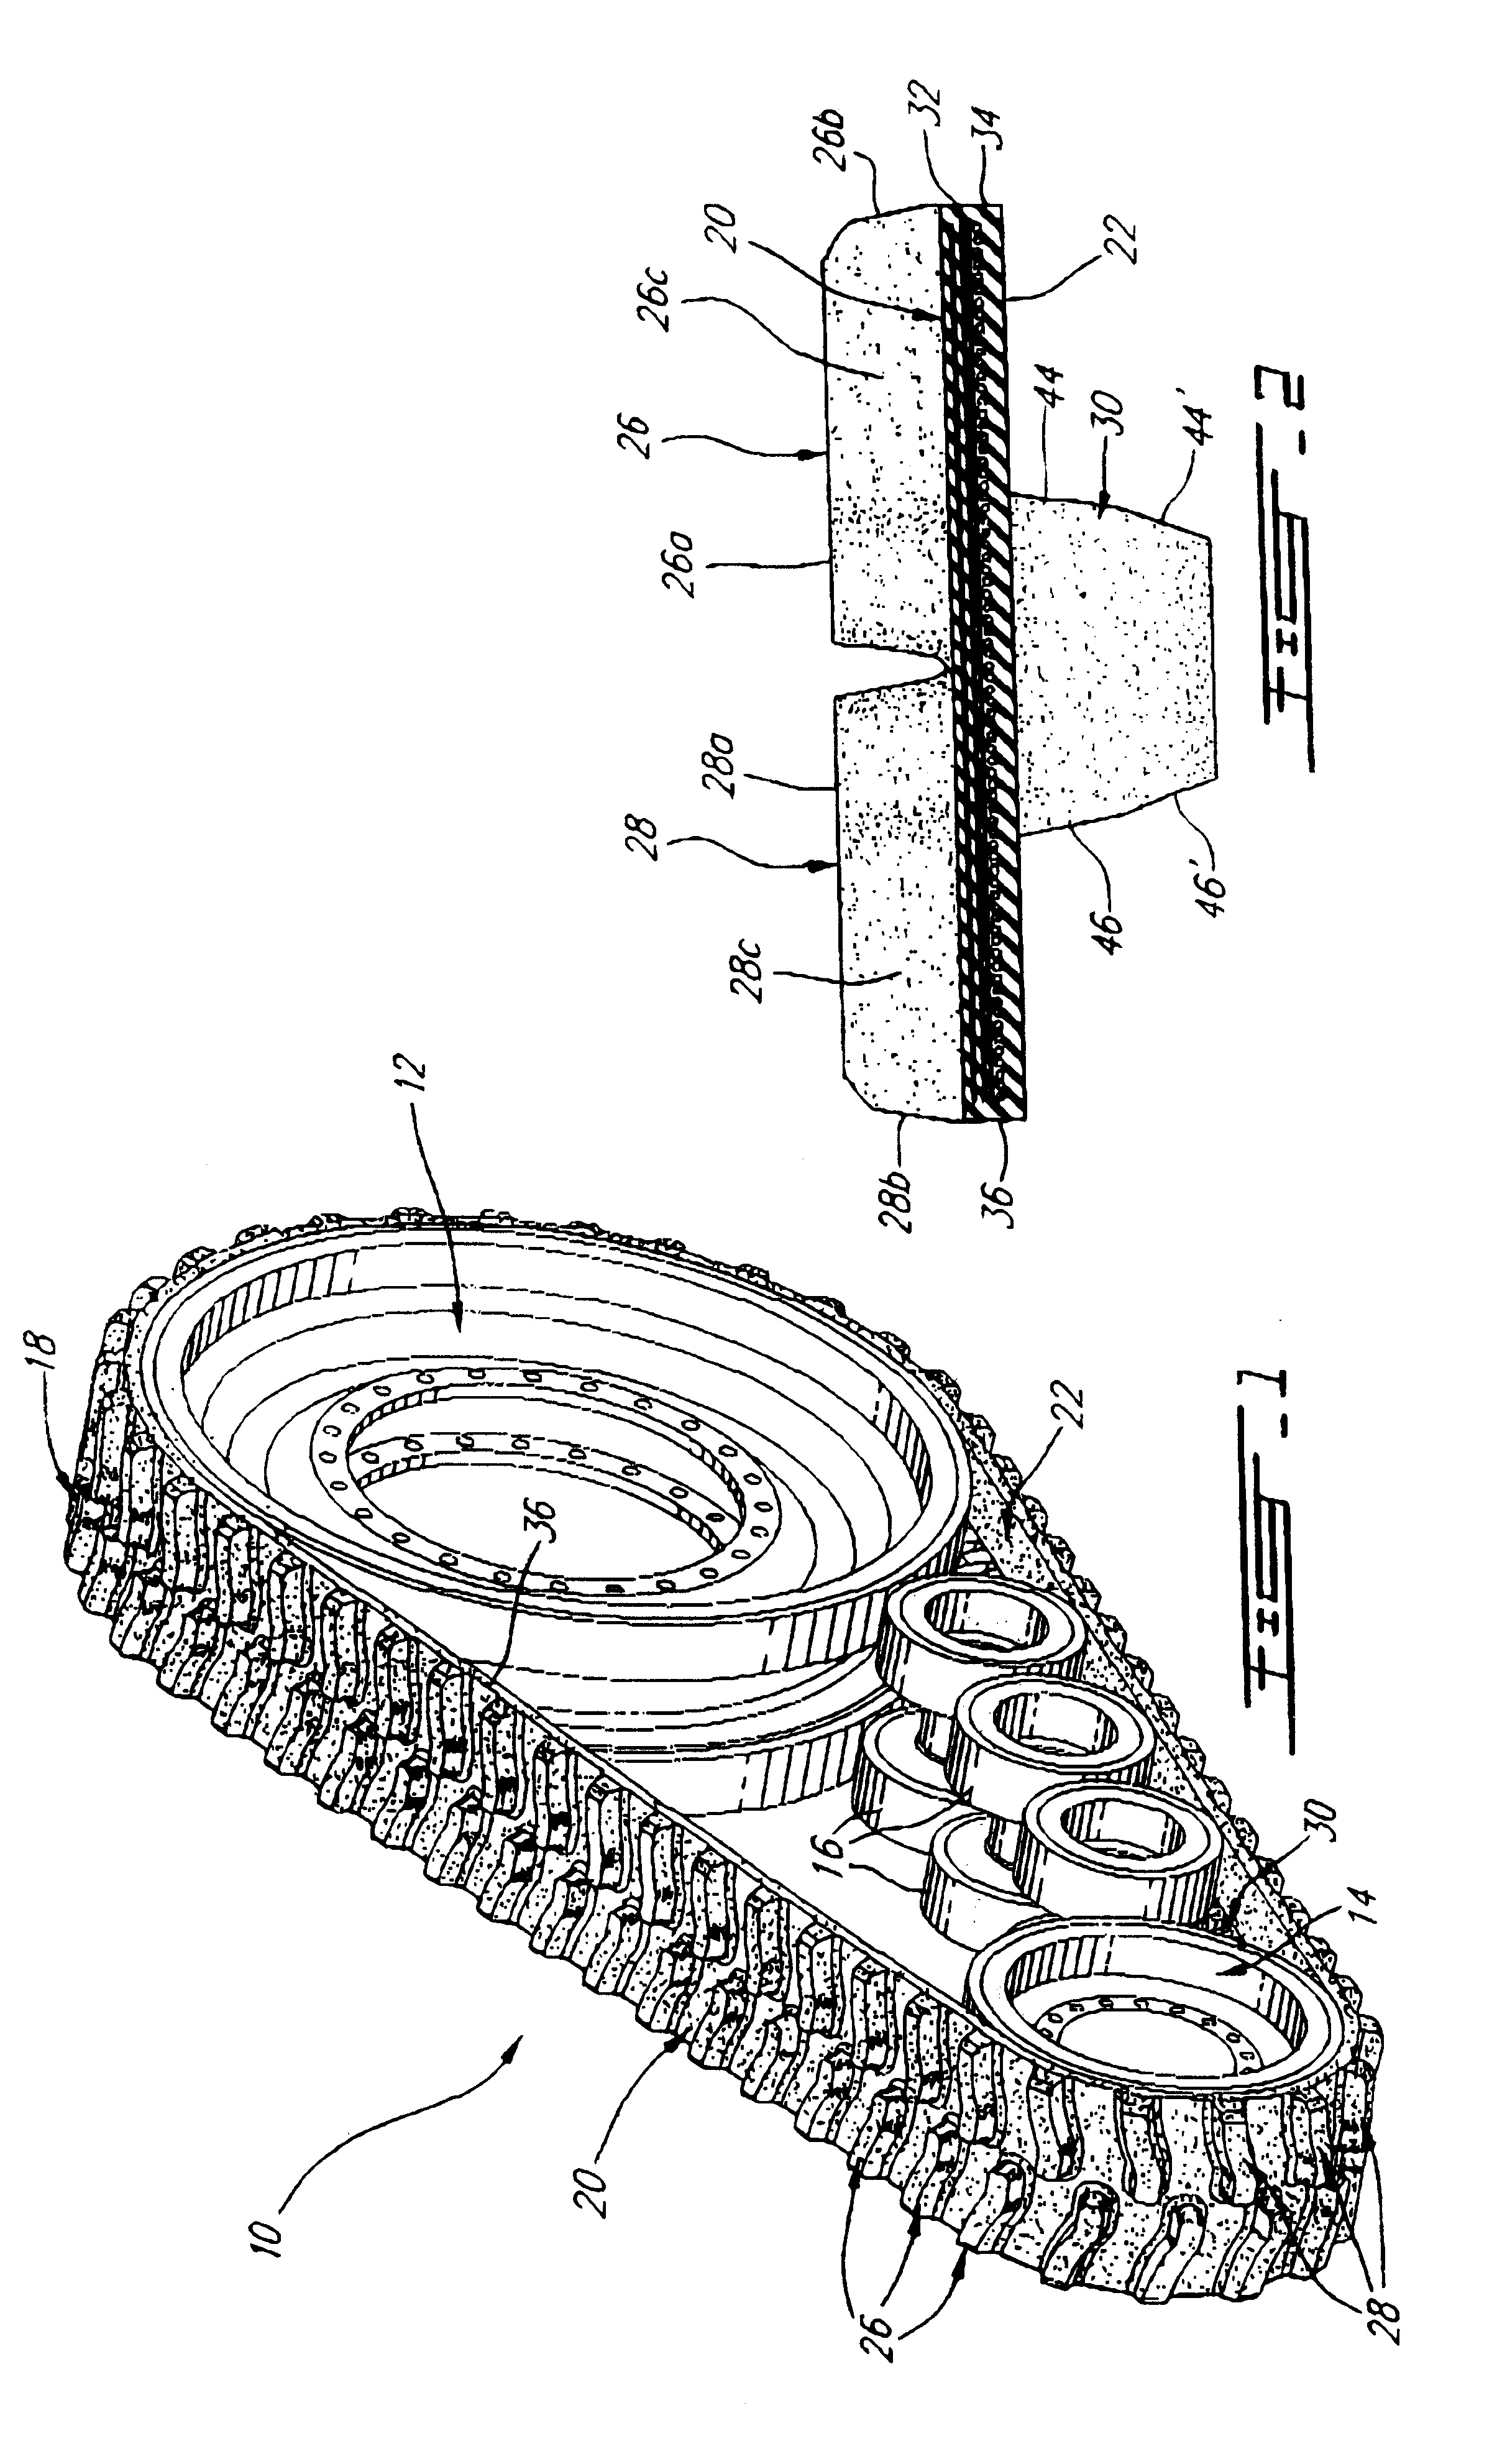 Endless belt for use with heavy duty track vehicles